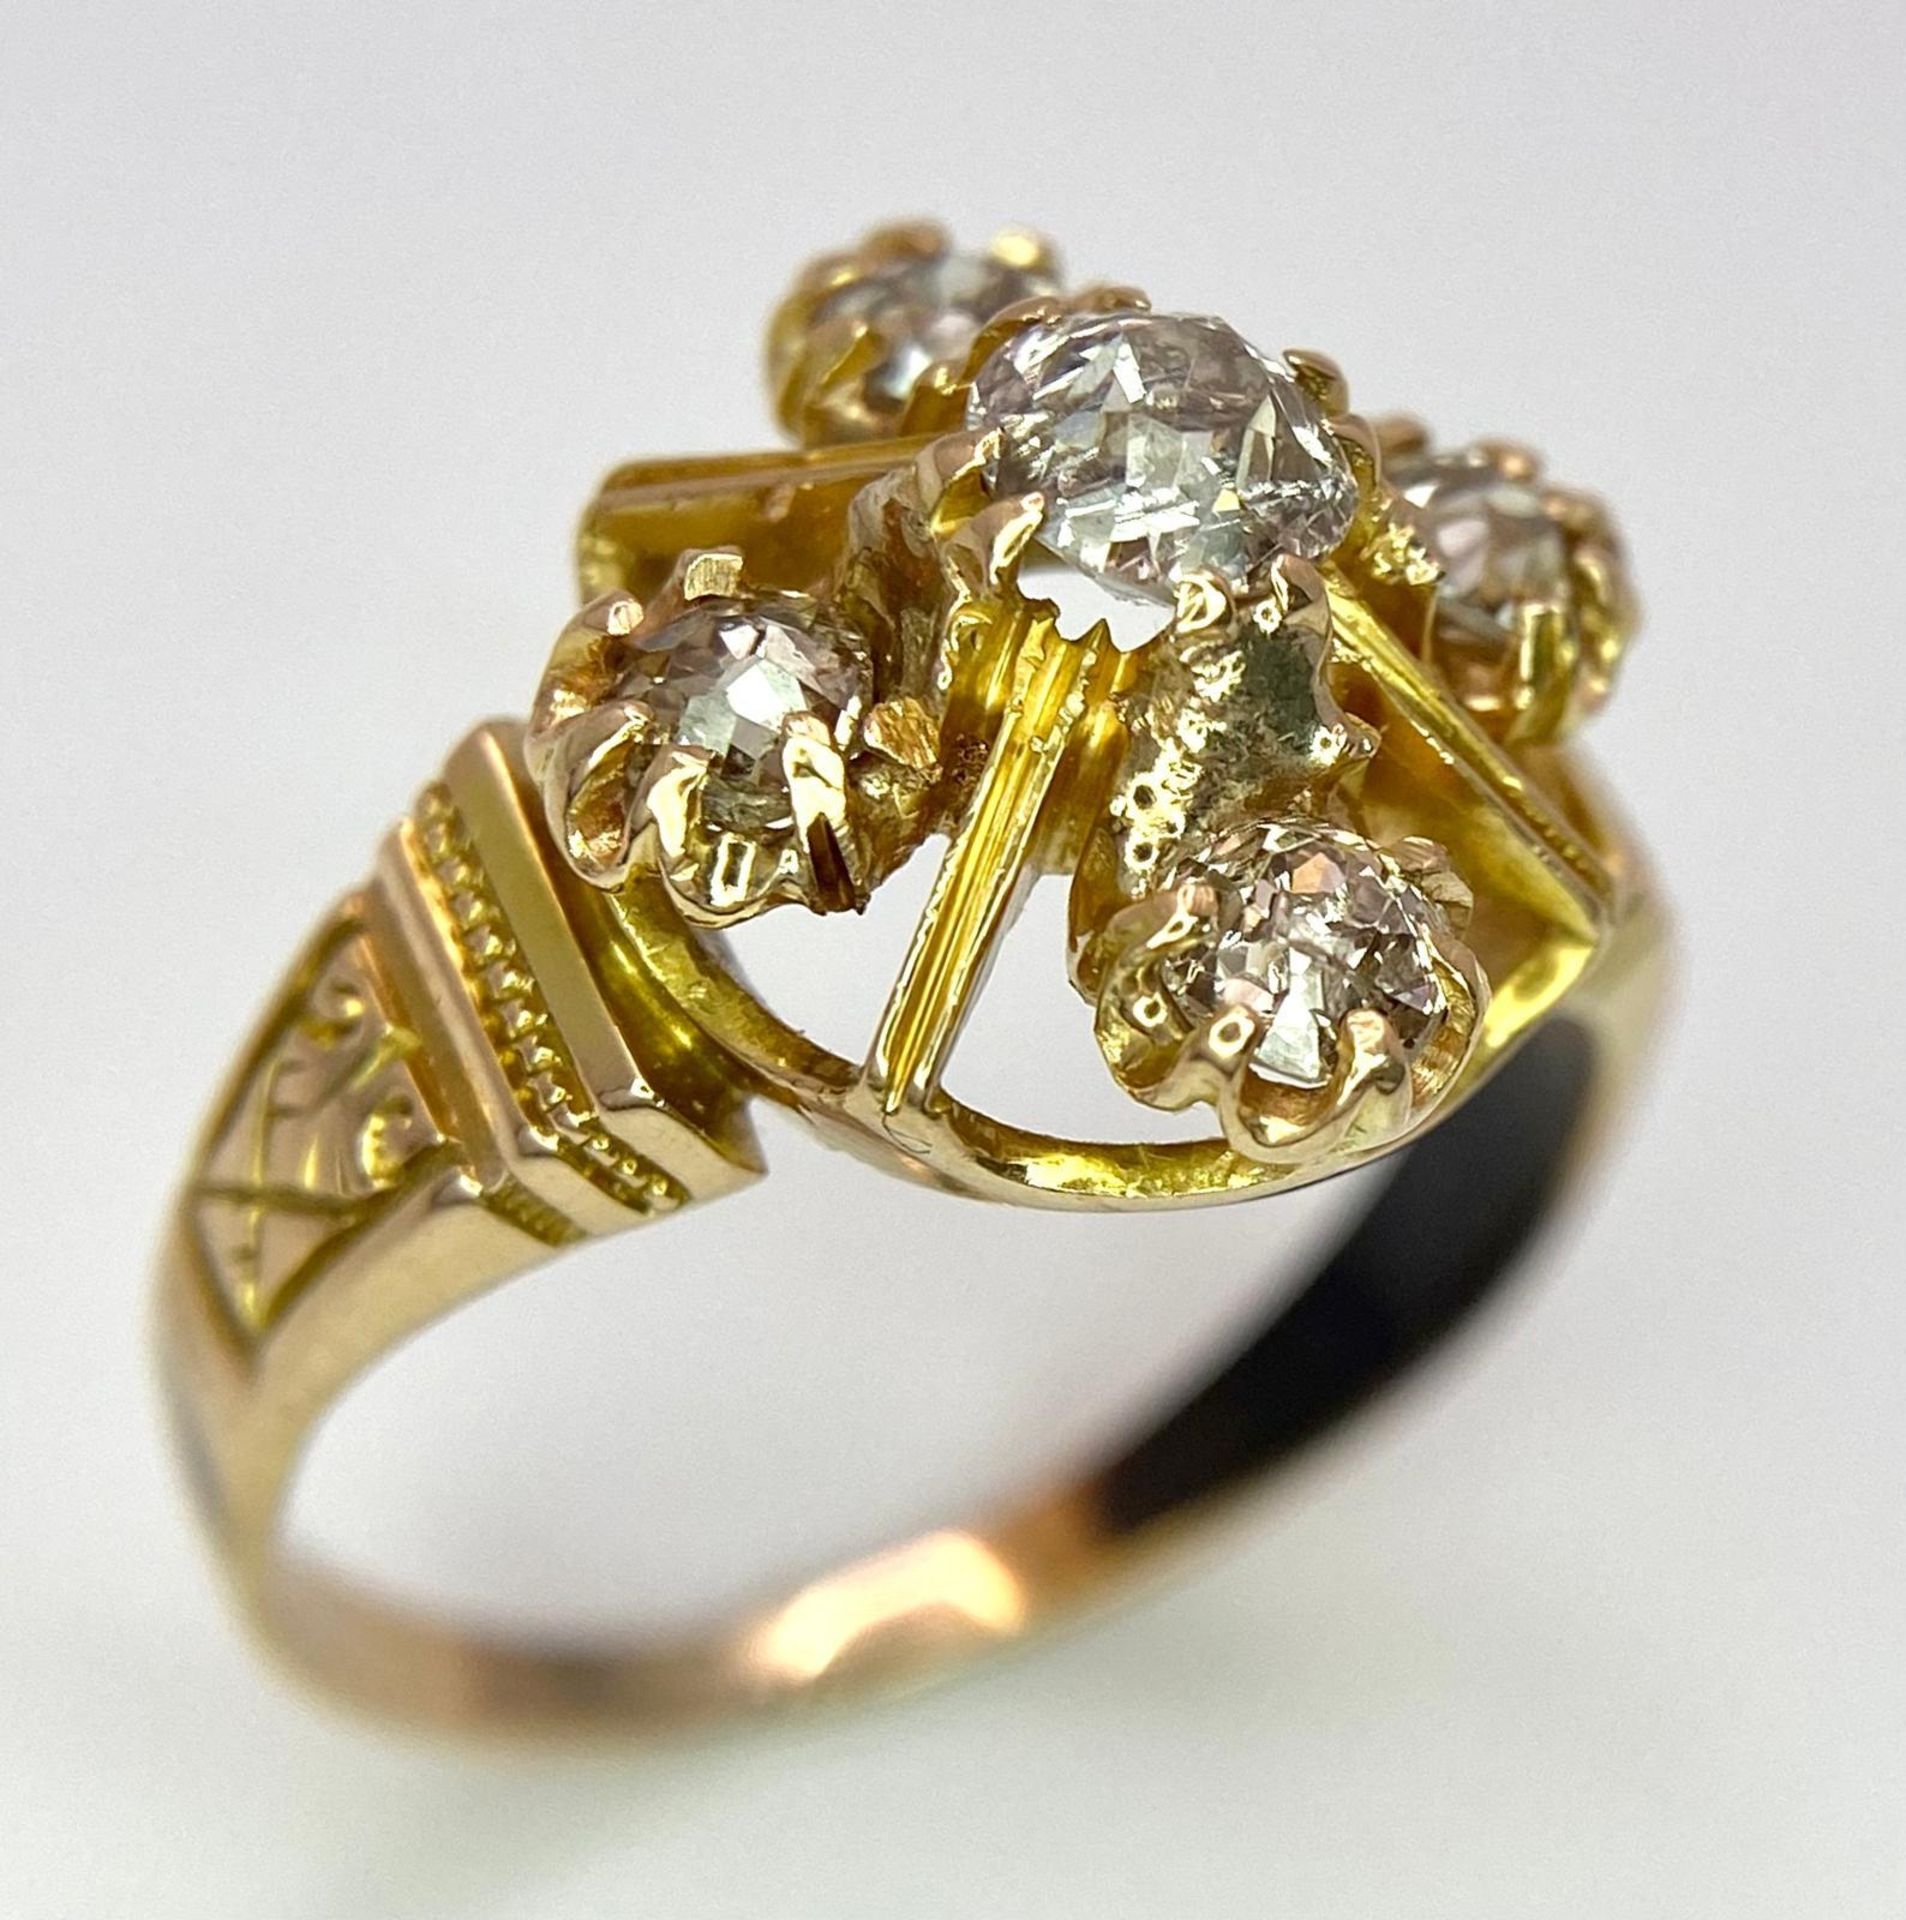 A 9K Yellow Gold (tested) Diamond Ring. Five round cut diamonds on a raised setting. Size N. 4.32g - Image 4 of 5